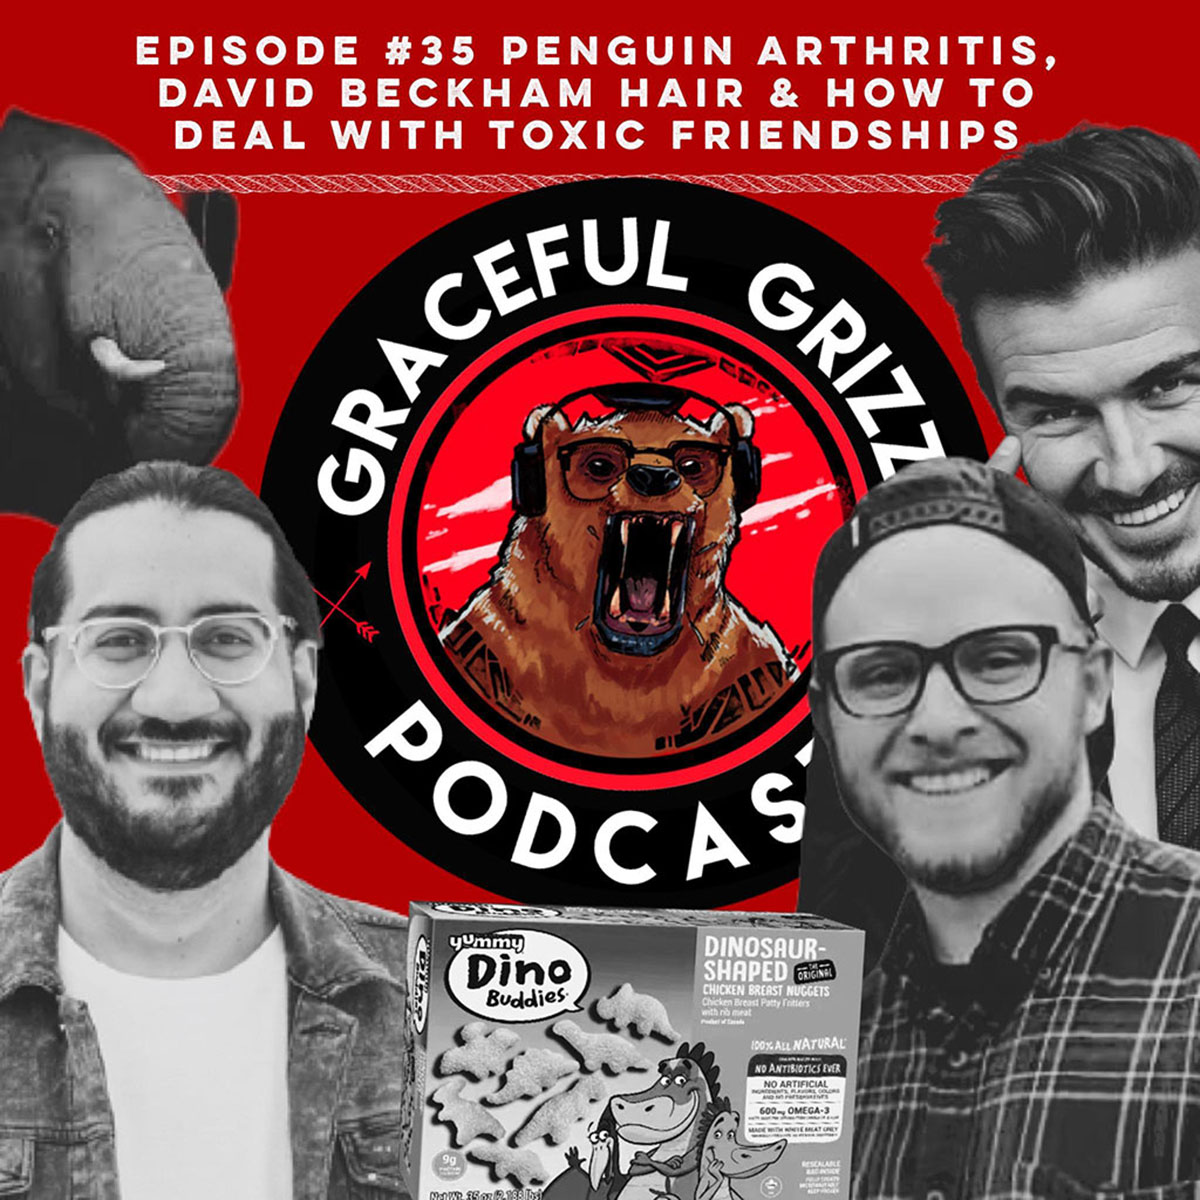 Episode 35 - Graceful Grizzly Podcast